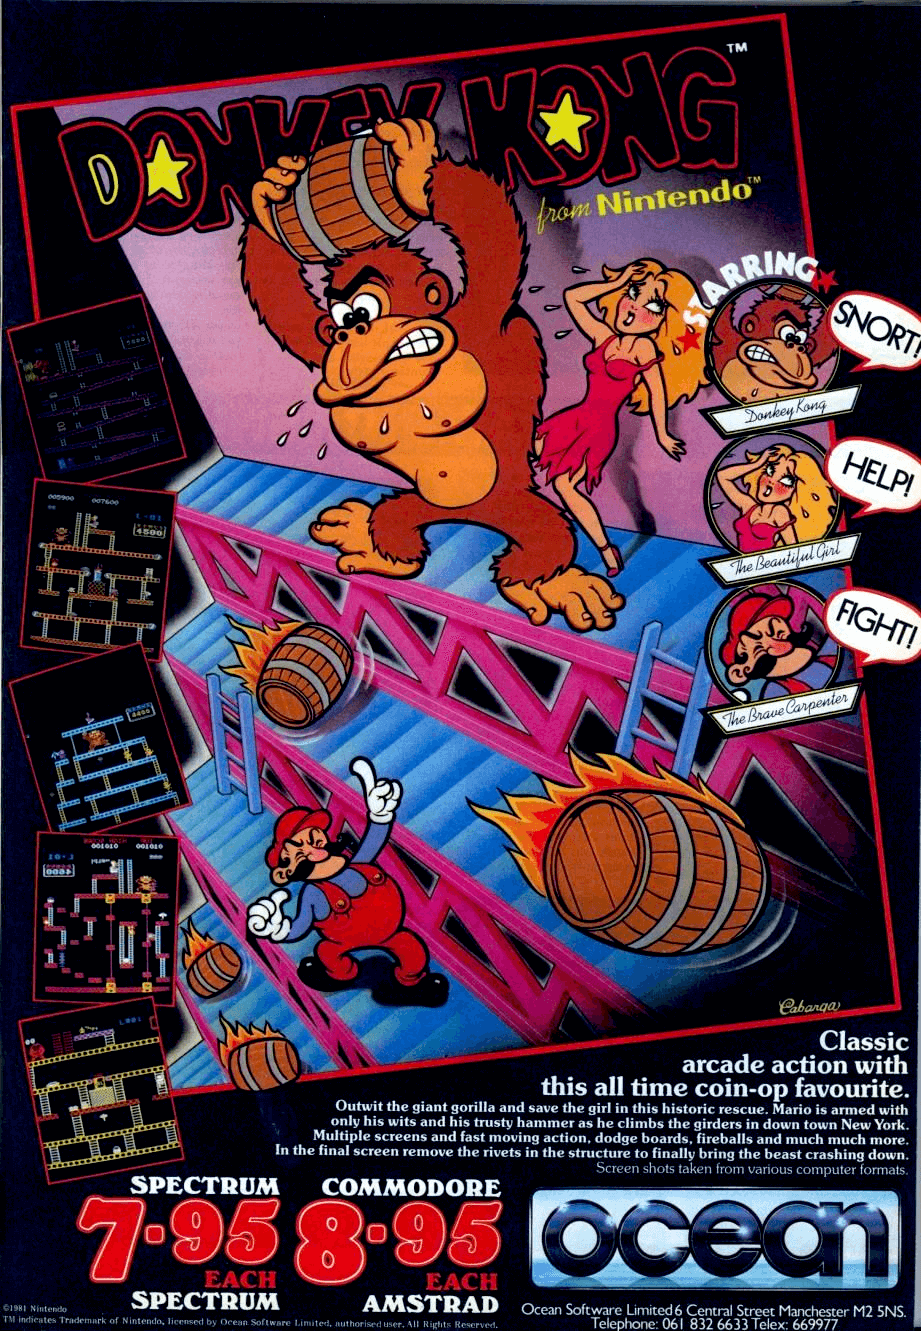 Image For Post | **Description**  
Released in the arcades in 1981, Donkey Kong was not only Nintendo's first real smash hit for the company, but marked the introduction for two of their most popular mascots: Mario (originally "Jumpman") and Donkey Kong.
Donkey Kong is a platform-action game that has Mario scale four different industrial themed levels (construction zone, cement factory, an elevator-themed level, and removing rivets from girders) in an attempt to save the damsel in distress, Pauline, from the big ape before the timer runs out. Once the rivets are removed from the final level, Donkey Kong falls, and the two lovers are reunited. From there, the levels start over at a higher difficulty.

Along the way, Mario must dodge a constant stream of barrels, "living" fireballs, and spring-weights. Although not as powerful as in other future games, Mario can find a hammer which allows him to destroy the barrels and fireballs for a limited amount of time. Additionally, Mario can also find Pauline's hat, purse and umbrella for additional bonus points.

Donkey Kong is also notable for being one of the first complete narratives in video game form, told through simplistic cut scenes that advance the story. It should also be noted that in many conversions of the original coin-op game for early 1980's consoles and computer-systems, Donkey Kong only used two or three of the original levels, with the cement factory most often omitted.

**Mario as a carpenter**  
By Miyamoto's own account, Mario's profession was chosen to fit with the game design. Since Donkey Kong was set on a construction site, Mario was made into a carpenter. When he appeared again in Mario Bros., it was decided he should be a plumber, since a lot of the game is played in underground settings.

Mario's character design, particularly his large nose, draws on western influences; once he became a plumber, Miyamoto decided to "put him in New York" and make him Italian, lightheartedly attributing Mario's nationality to his mustache.[sic] Other sources have Mario's profession chosen to be carpenter in an effort to depict the character as an ordinary hard worker, and make it easier for players to identify with him. After a colleague suggested that Mario more closely resembled a plumber, Miyamoto changed Mario's profession accordingly and developed Mario Bros., featuring the character in the sewers of New York City.

**Alternate Titles**  
    "Donkey Kong-e" -- e-Reader title
    "DK" -- Common abbreviation
    "ドンキーコング" -- Japanese spelling